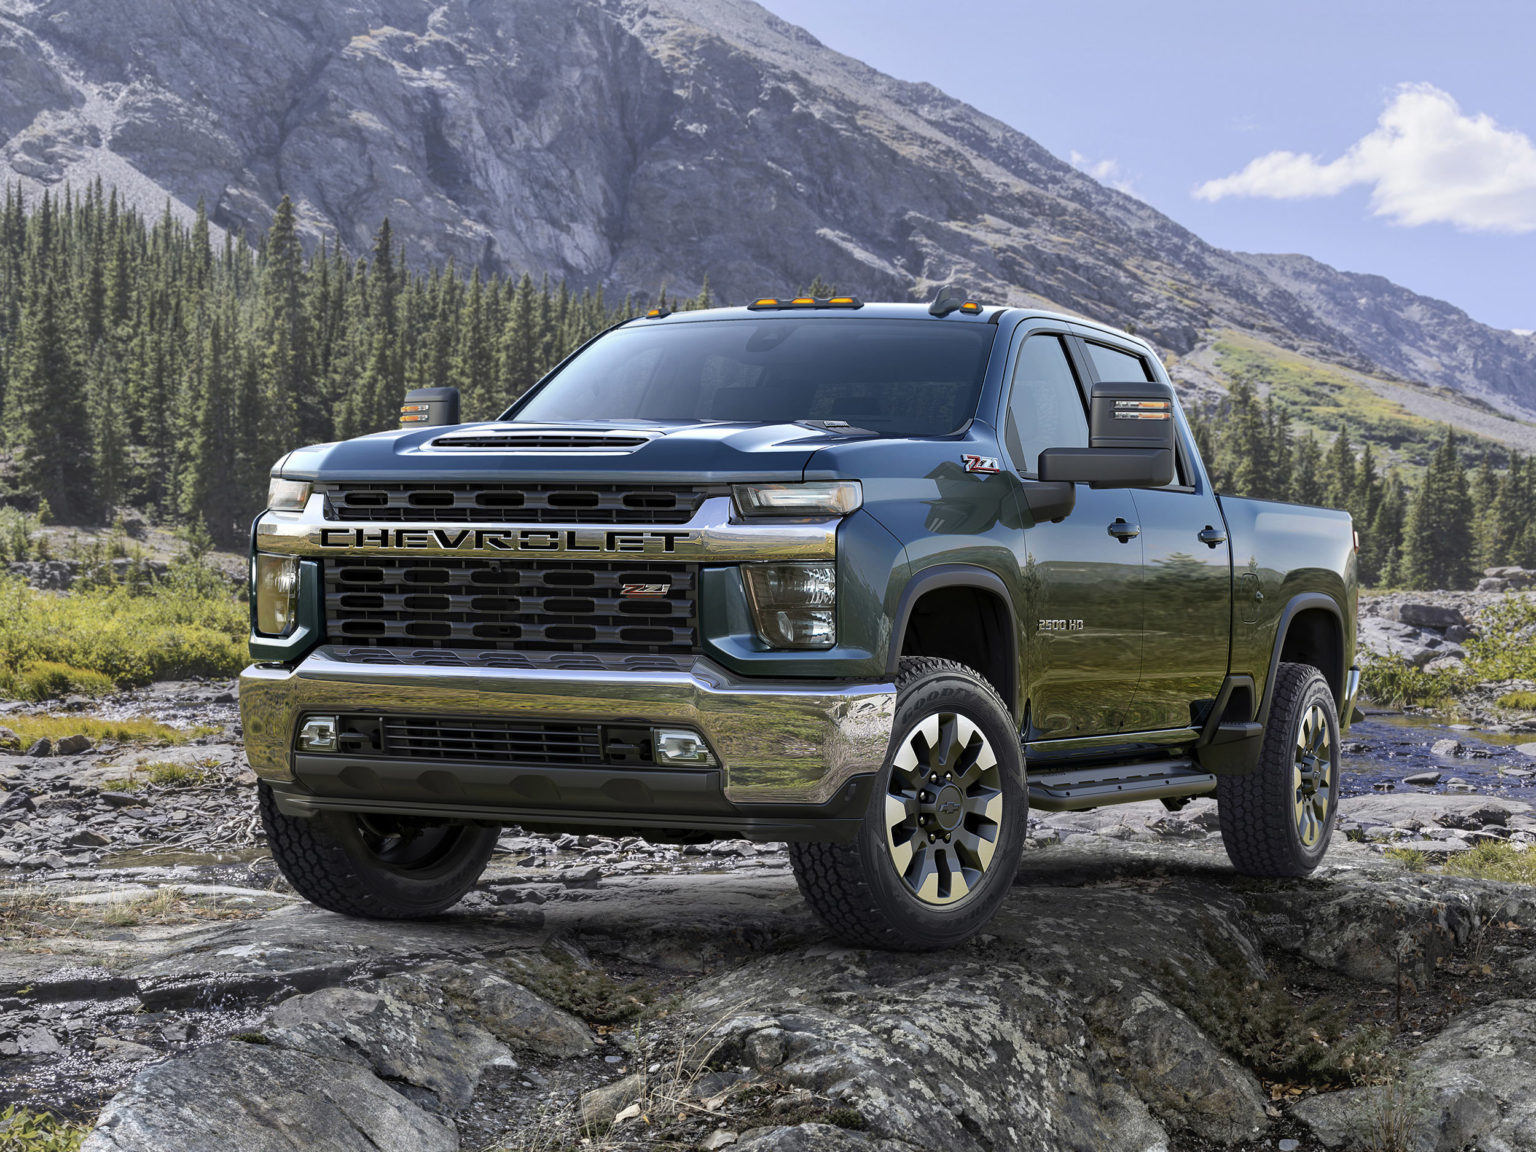 Chevy and Ford trucks lead the list of vehicles searched for the most in the U.S